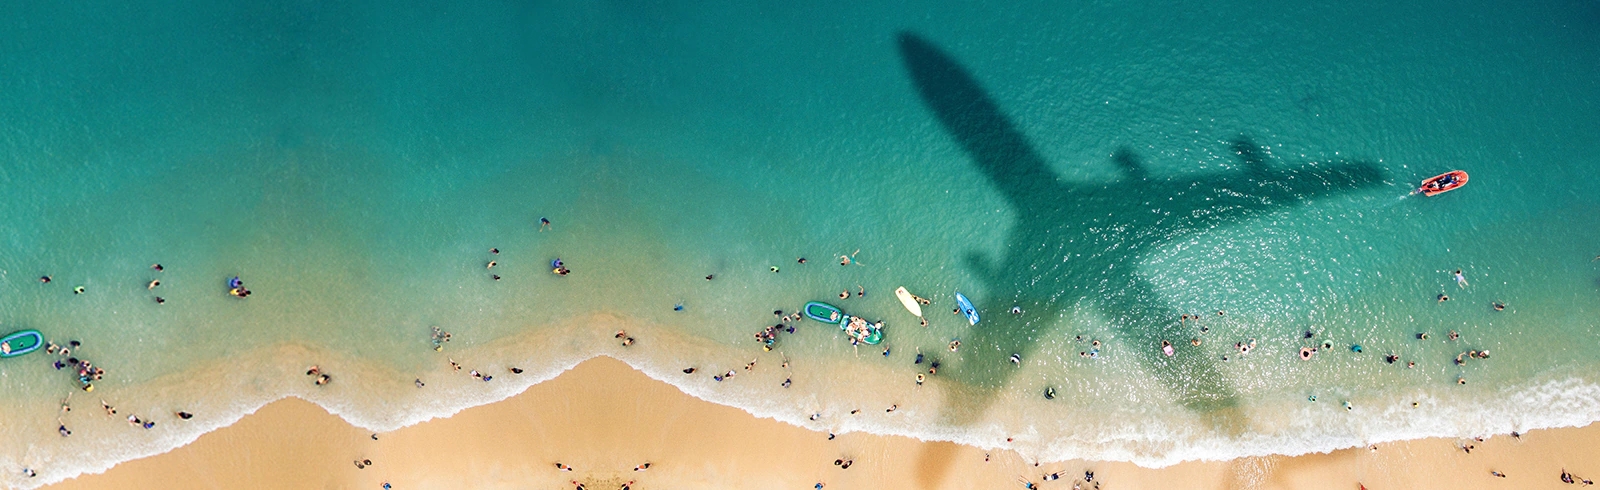 Shadow of a plane over a sunny beach full of people